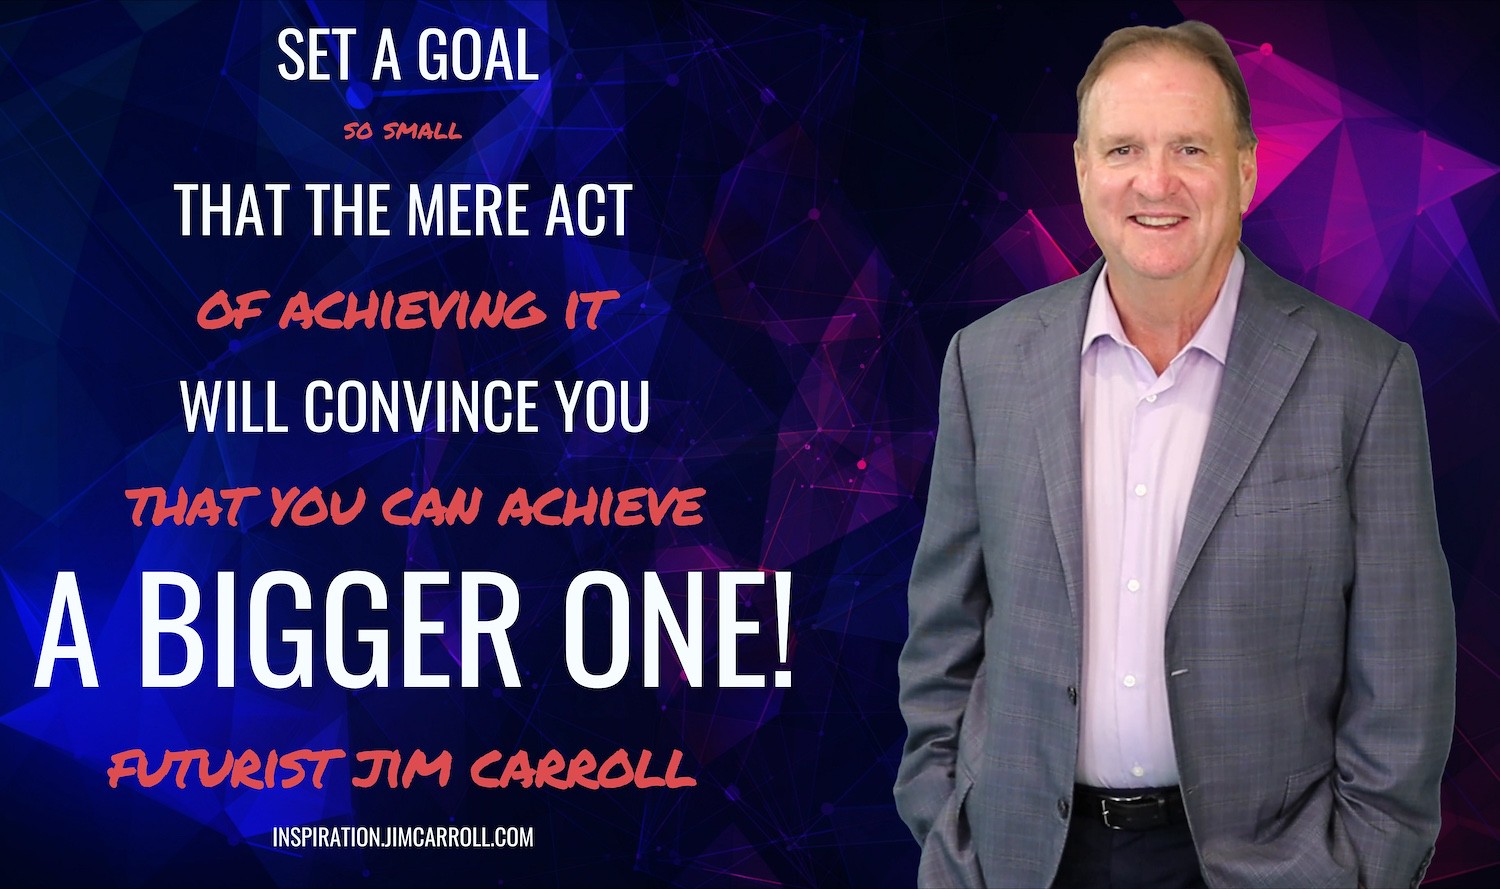 "Set a goal so small that the mere act of achieving it will convince you that you can achieve a bigger one!" - Futurist Jim Carroll